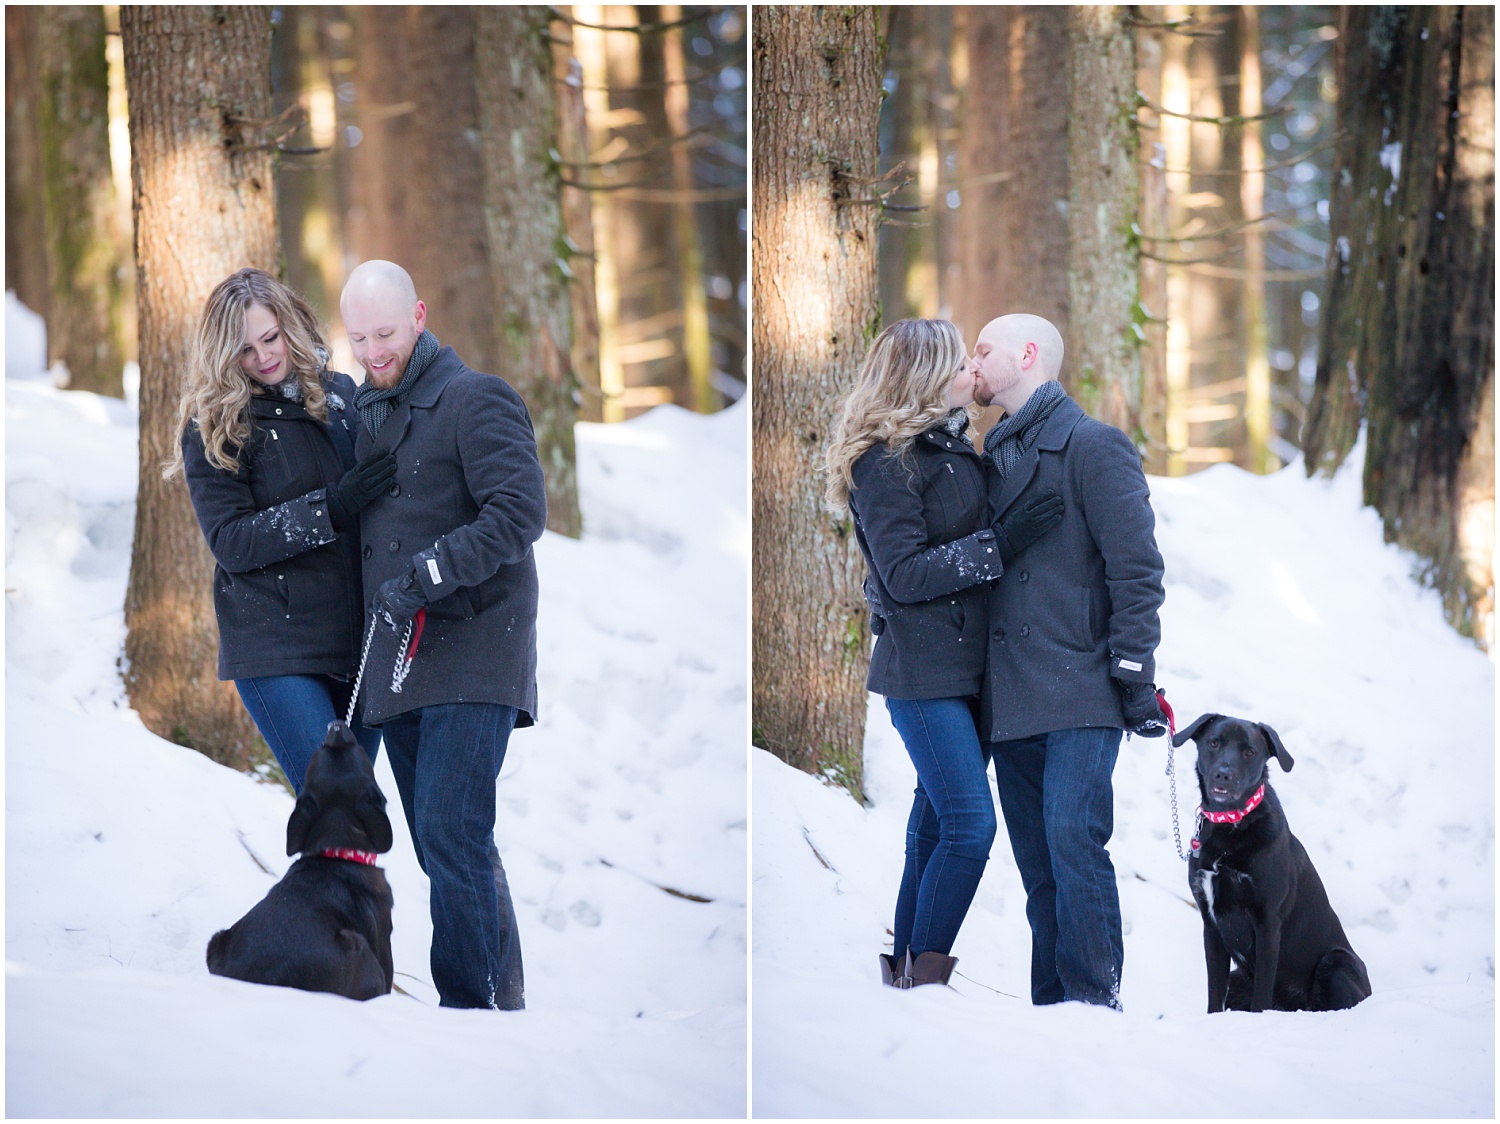 Amazing Day Photography - Langely Wedding Photographer - Snow Engagement Session - Mount Seymour Engagement - Winter Engagement Session - North Vancouver Engagement Session  (3).jpg